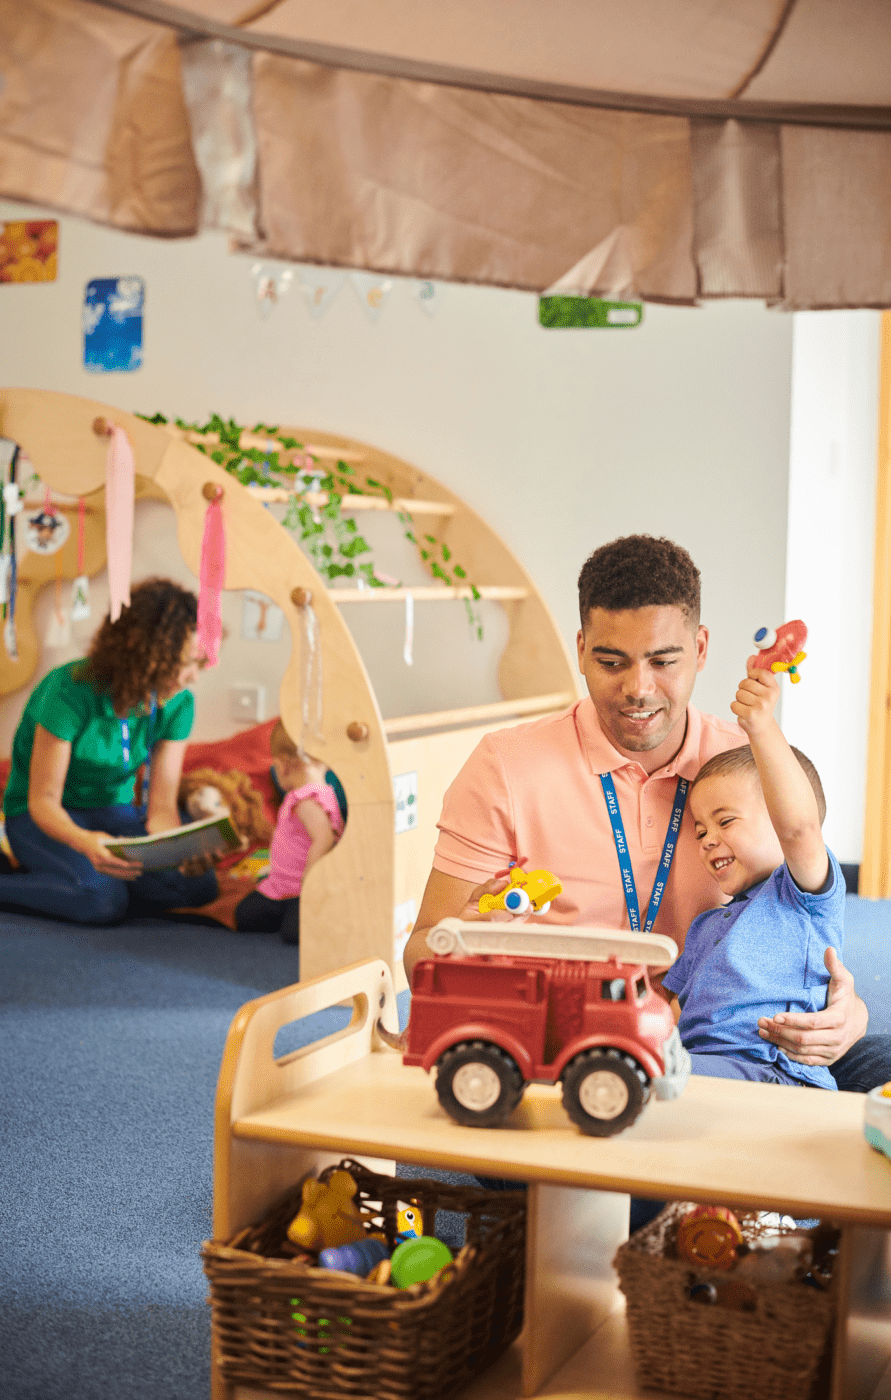 Child care providers working in a preschool. Pictued on the left is one worker reading to a child and on the right is one worker holding a child while paying with toy airplanes.